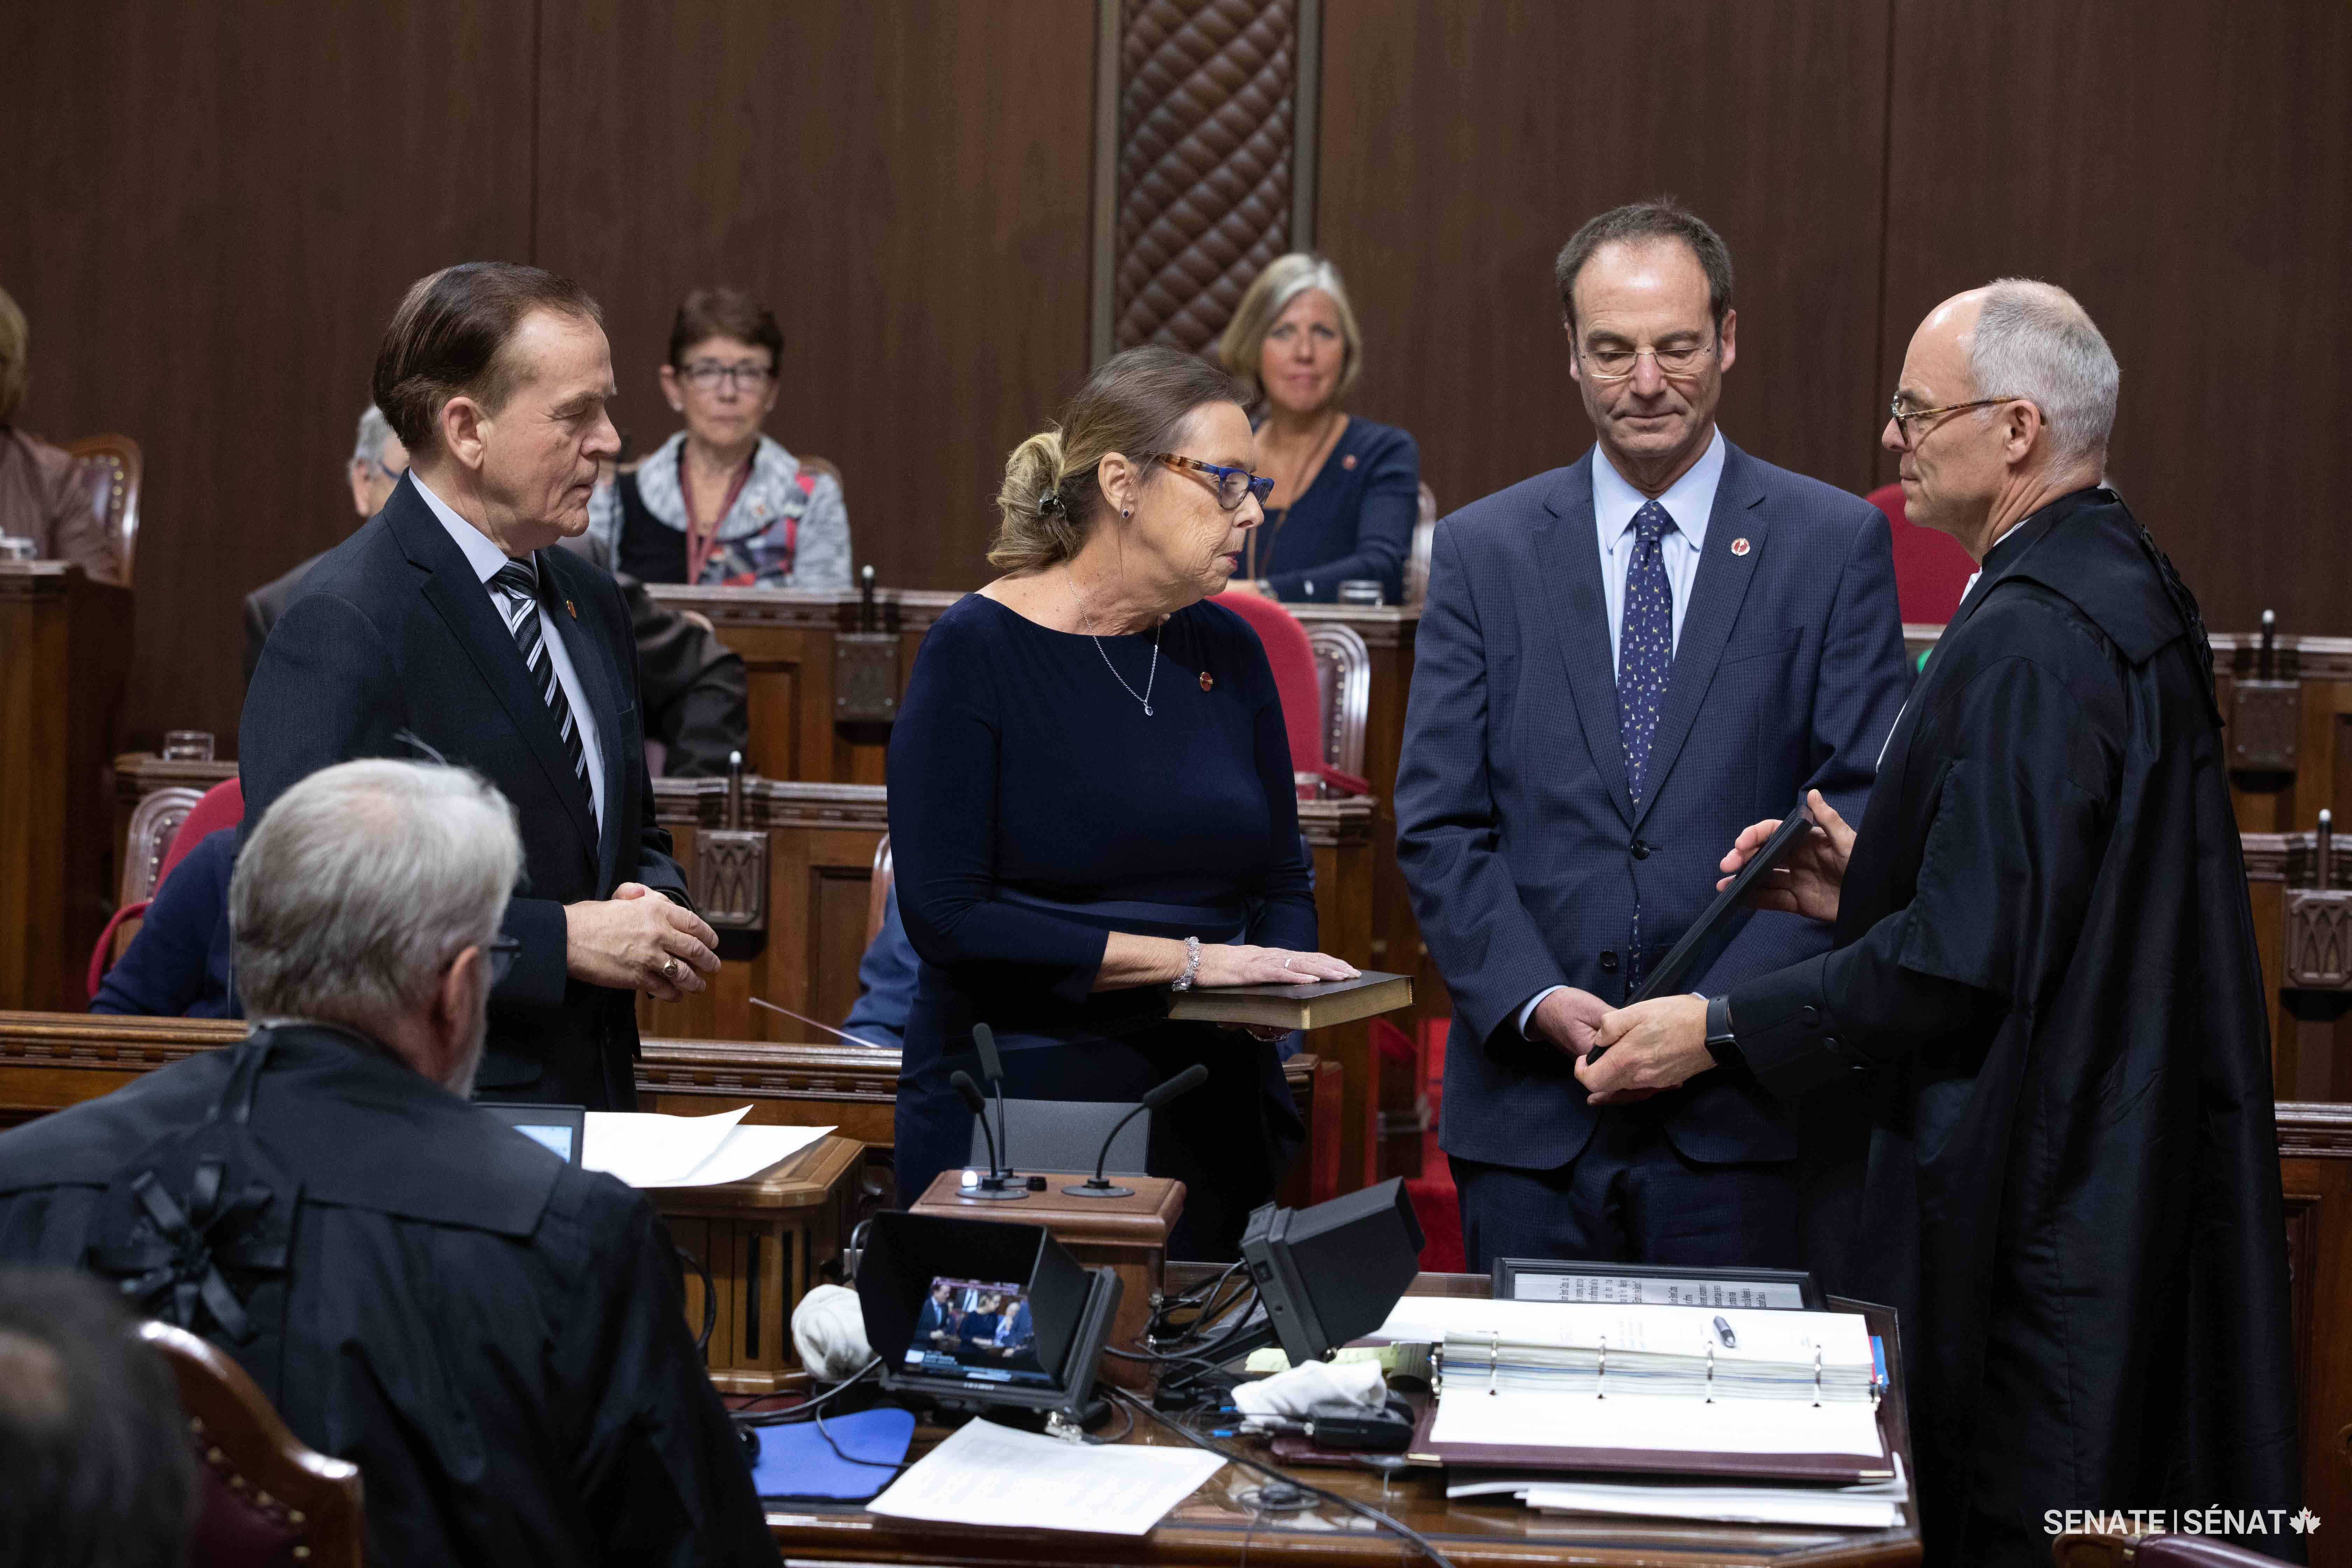 Senator Keating’s swearing-in ceremony took place at the Senate of Canada Building on February 4, 2020. She was led into the Red Chamber by her sponsor, New Brunswick Senator Percy Mockler (left) and Senator Marc Gold (right), the government’s representative in the Senate.